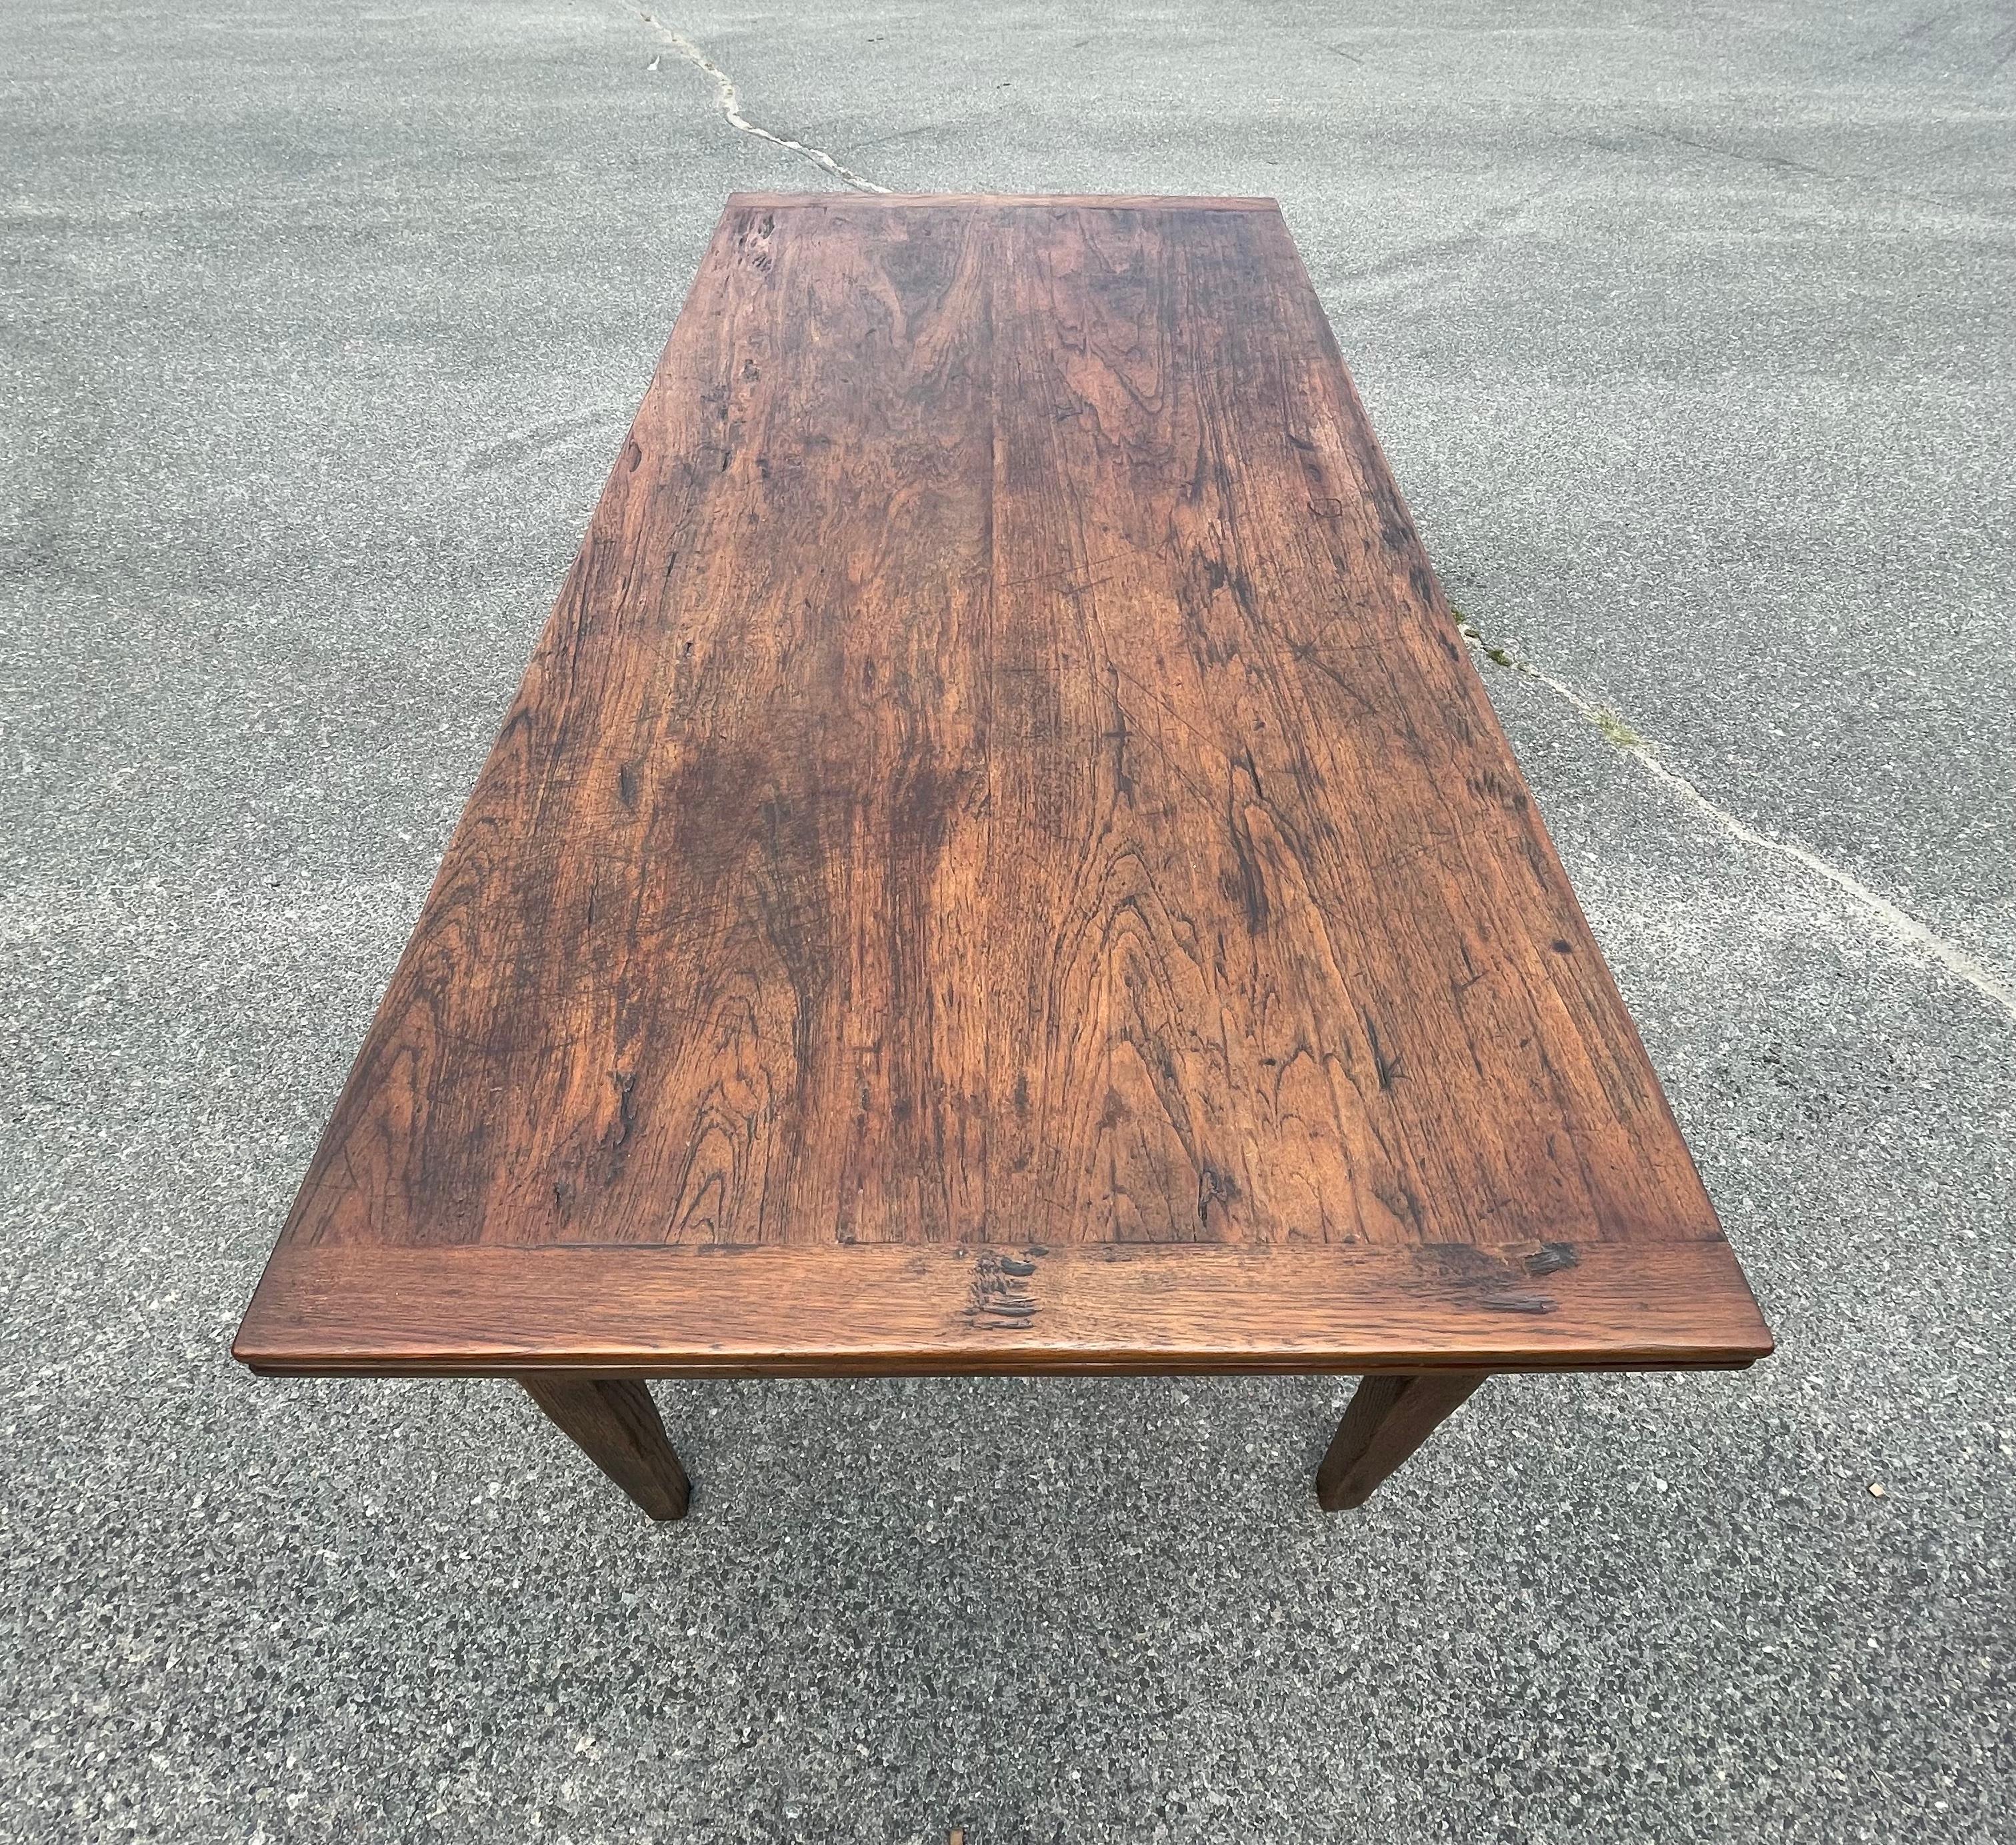 Chestnut dining table with draw leaf extensions on either side.  Top with nutty brown finish and rich aged look.  On taper legs.
Extends to 116 inches